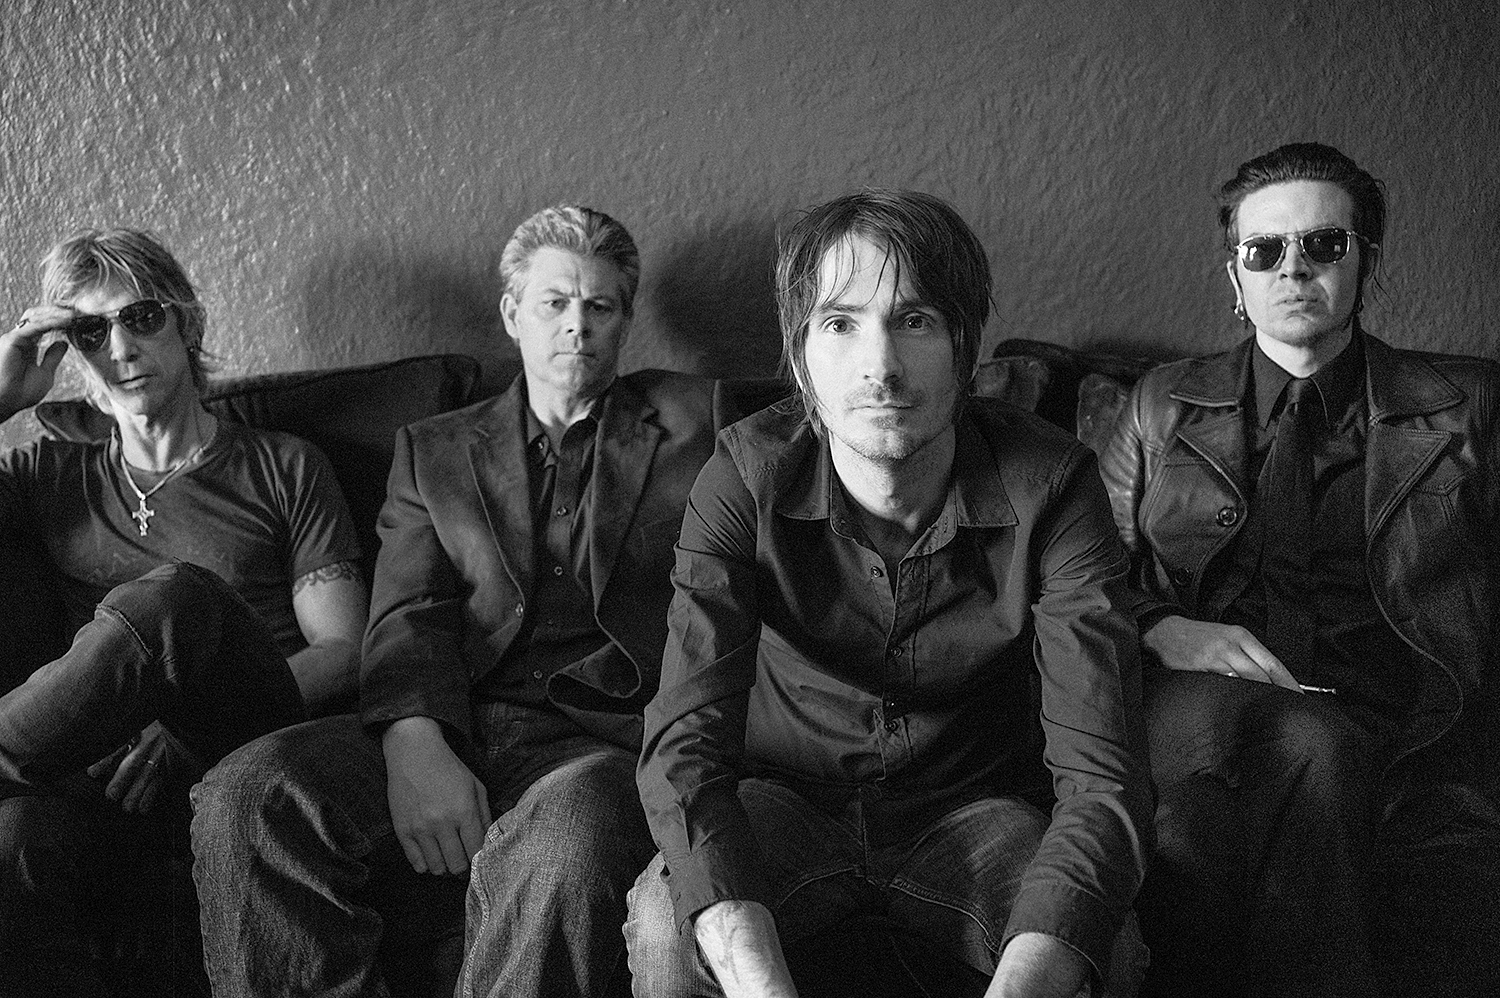 Walking Papers highlights one of the great strengths of the Seattle music